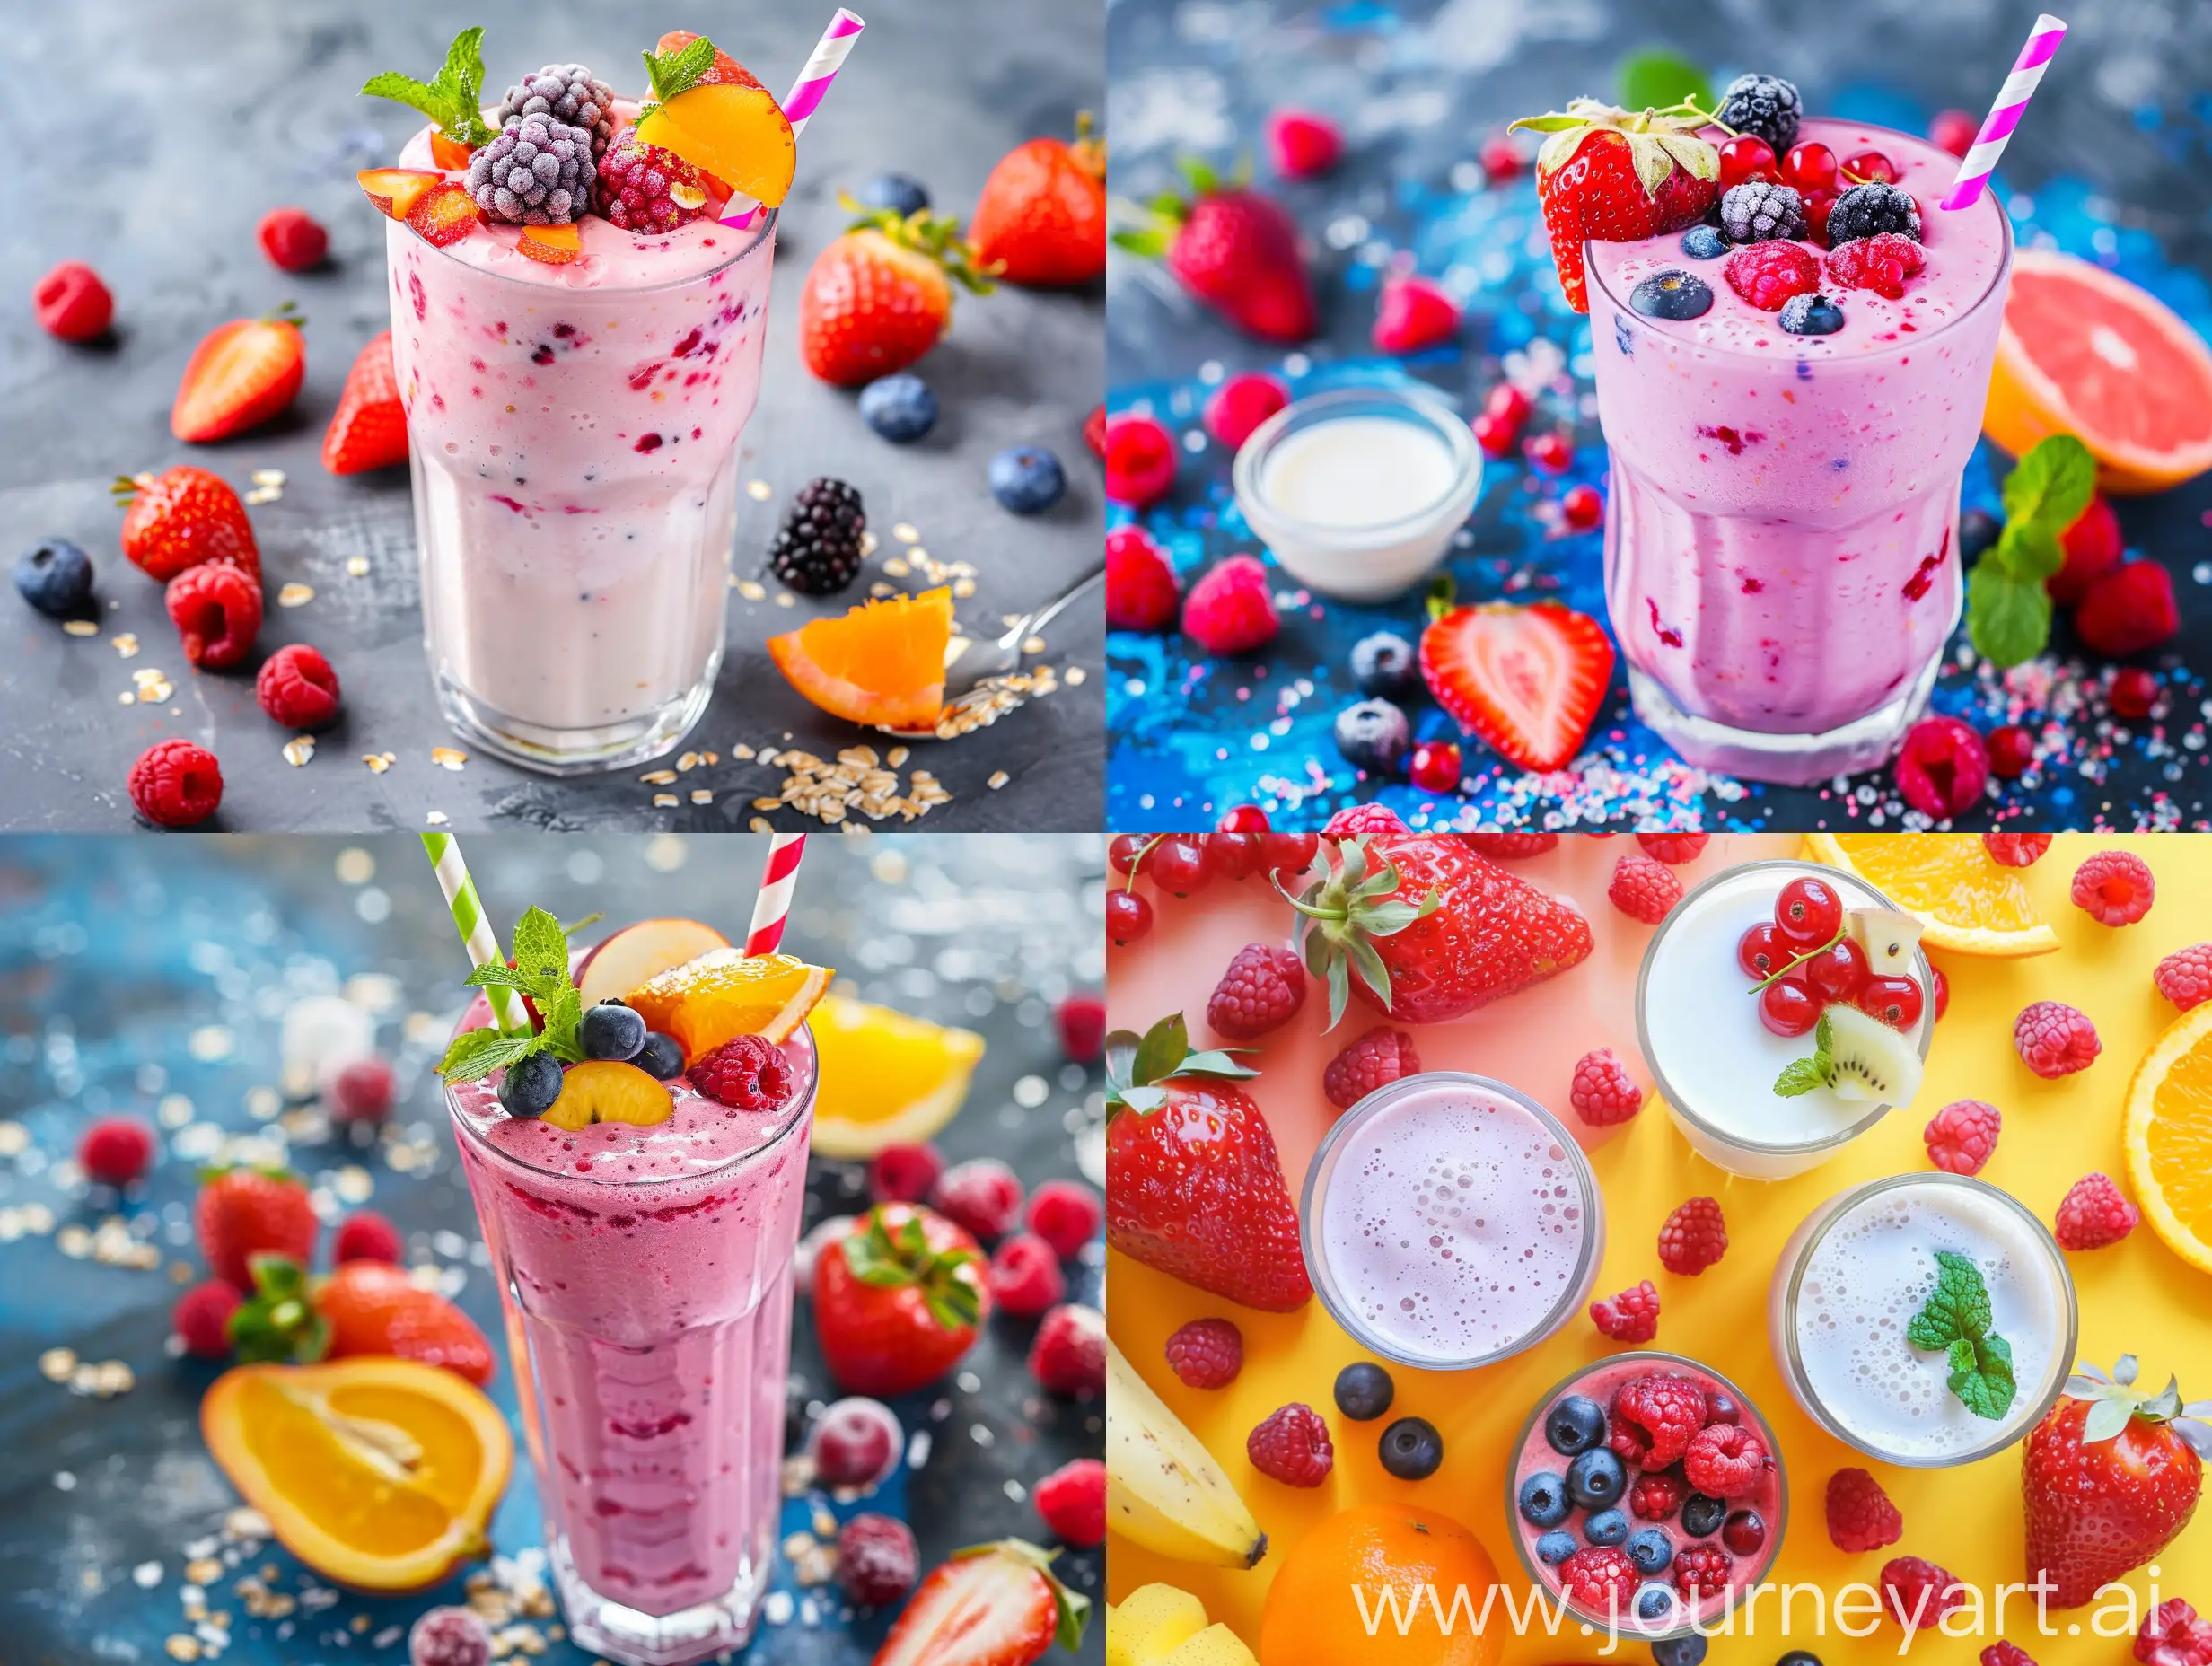 milkshake on bright background with fruits and berries and milk